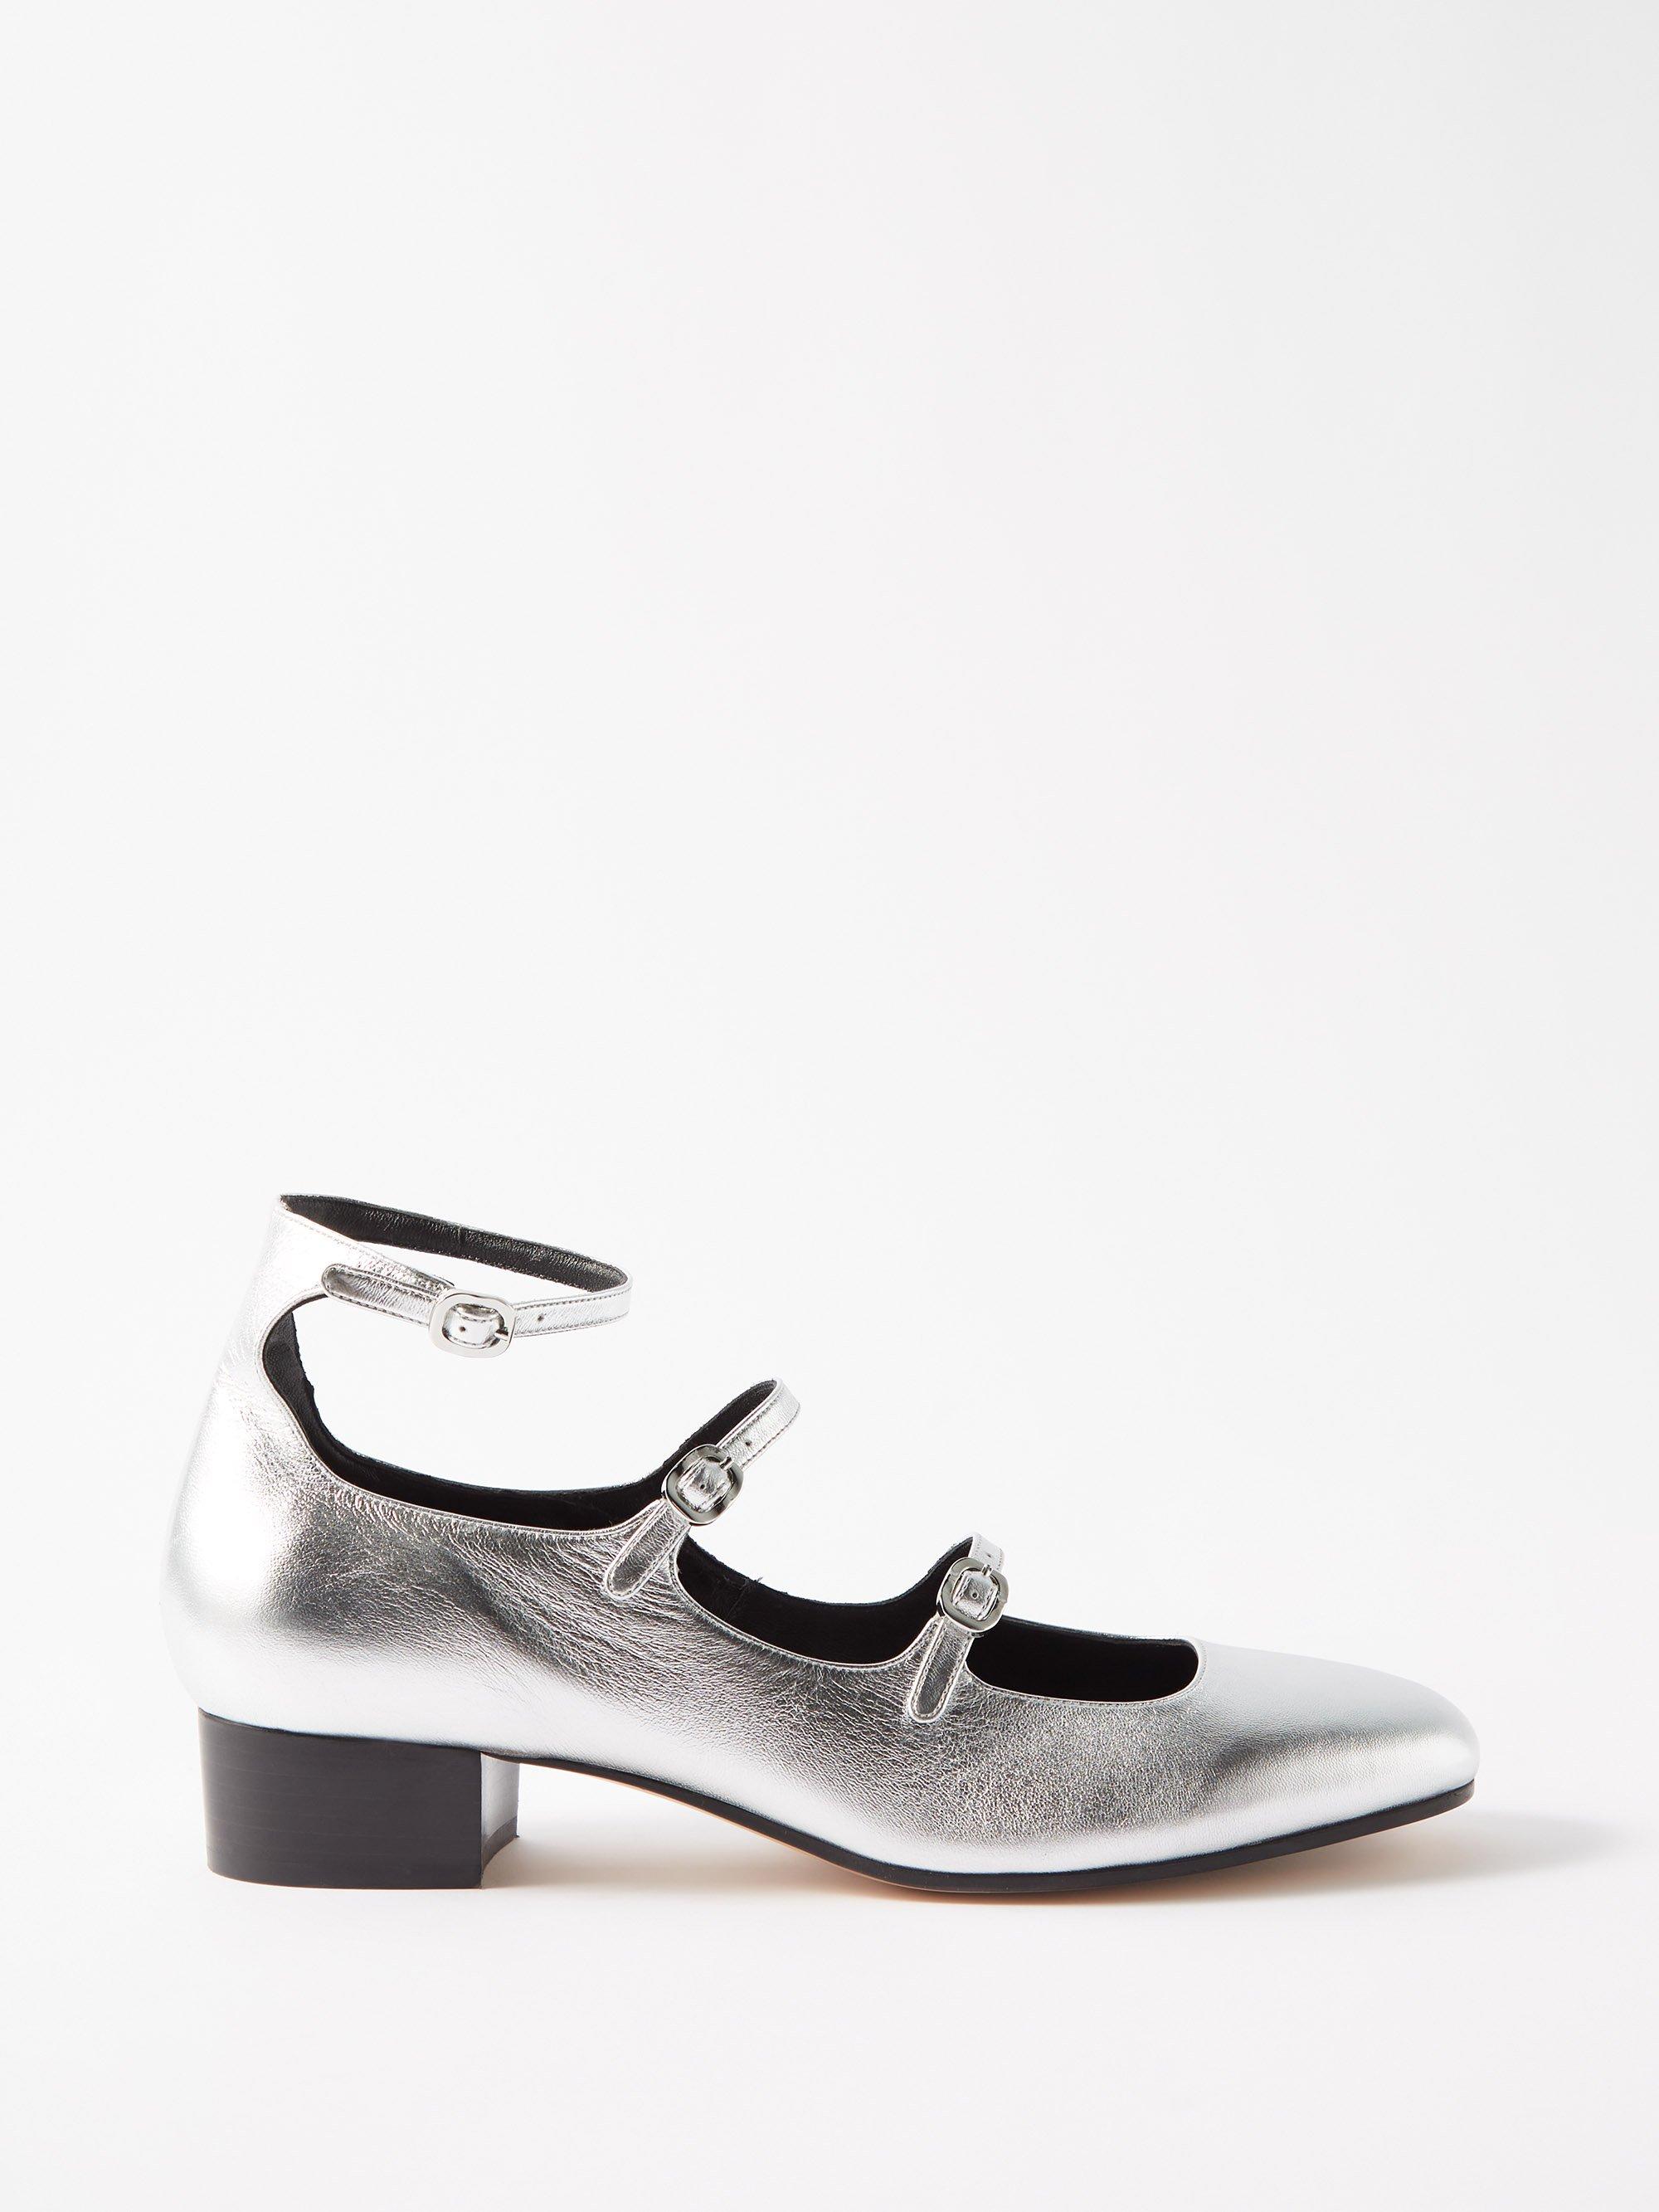 Le Monde Beryl Alexia 35 Metallic-leather Mary Jane Shoes in White | Lyst